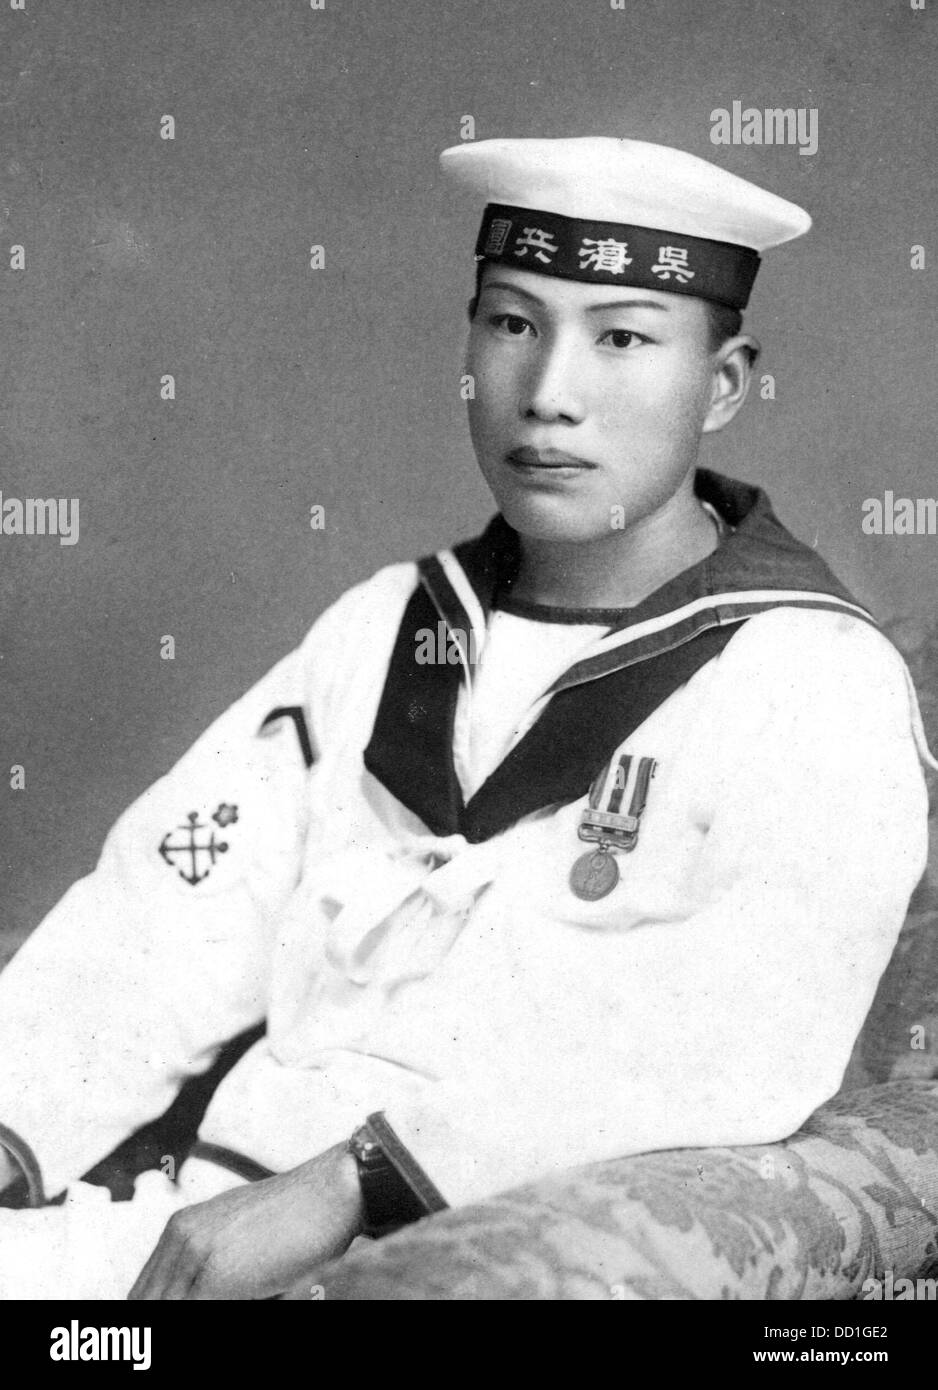 A Japanese sailor of the 1930s 1940s in white summer uniform Stock Photo